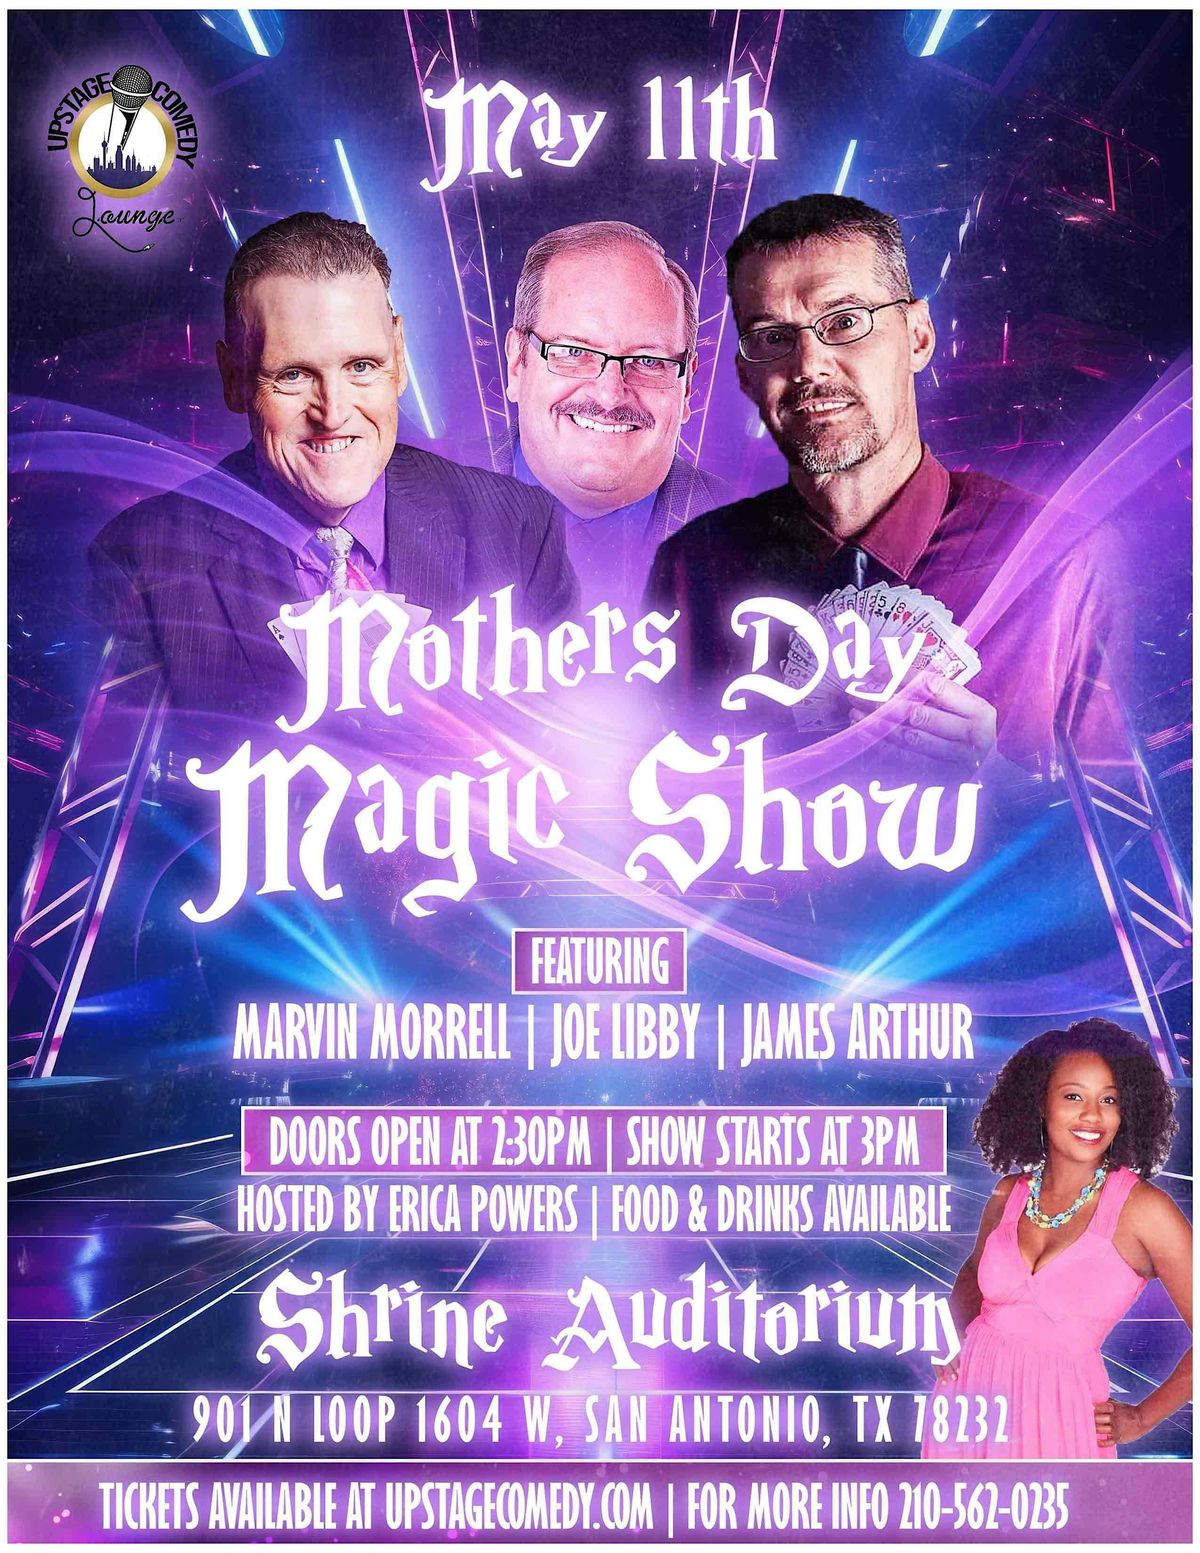 The Mother's Day Magic Show (Kid friendly show at the Shrine Auditorium)